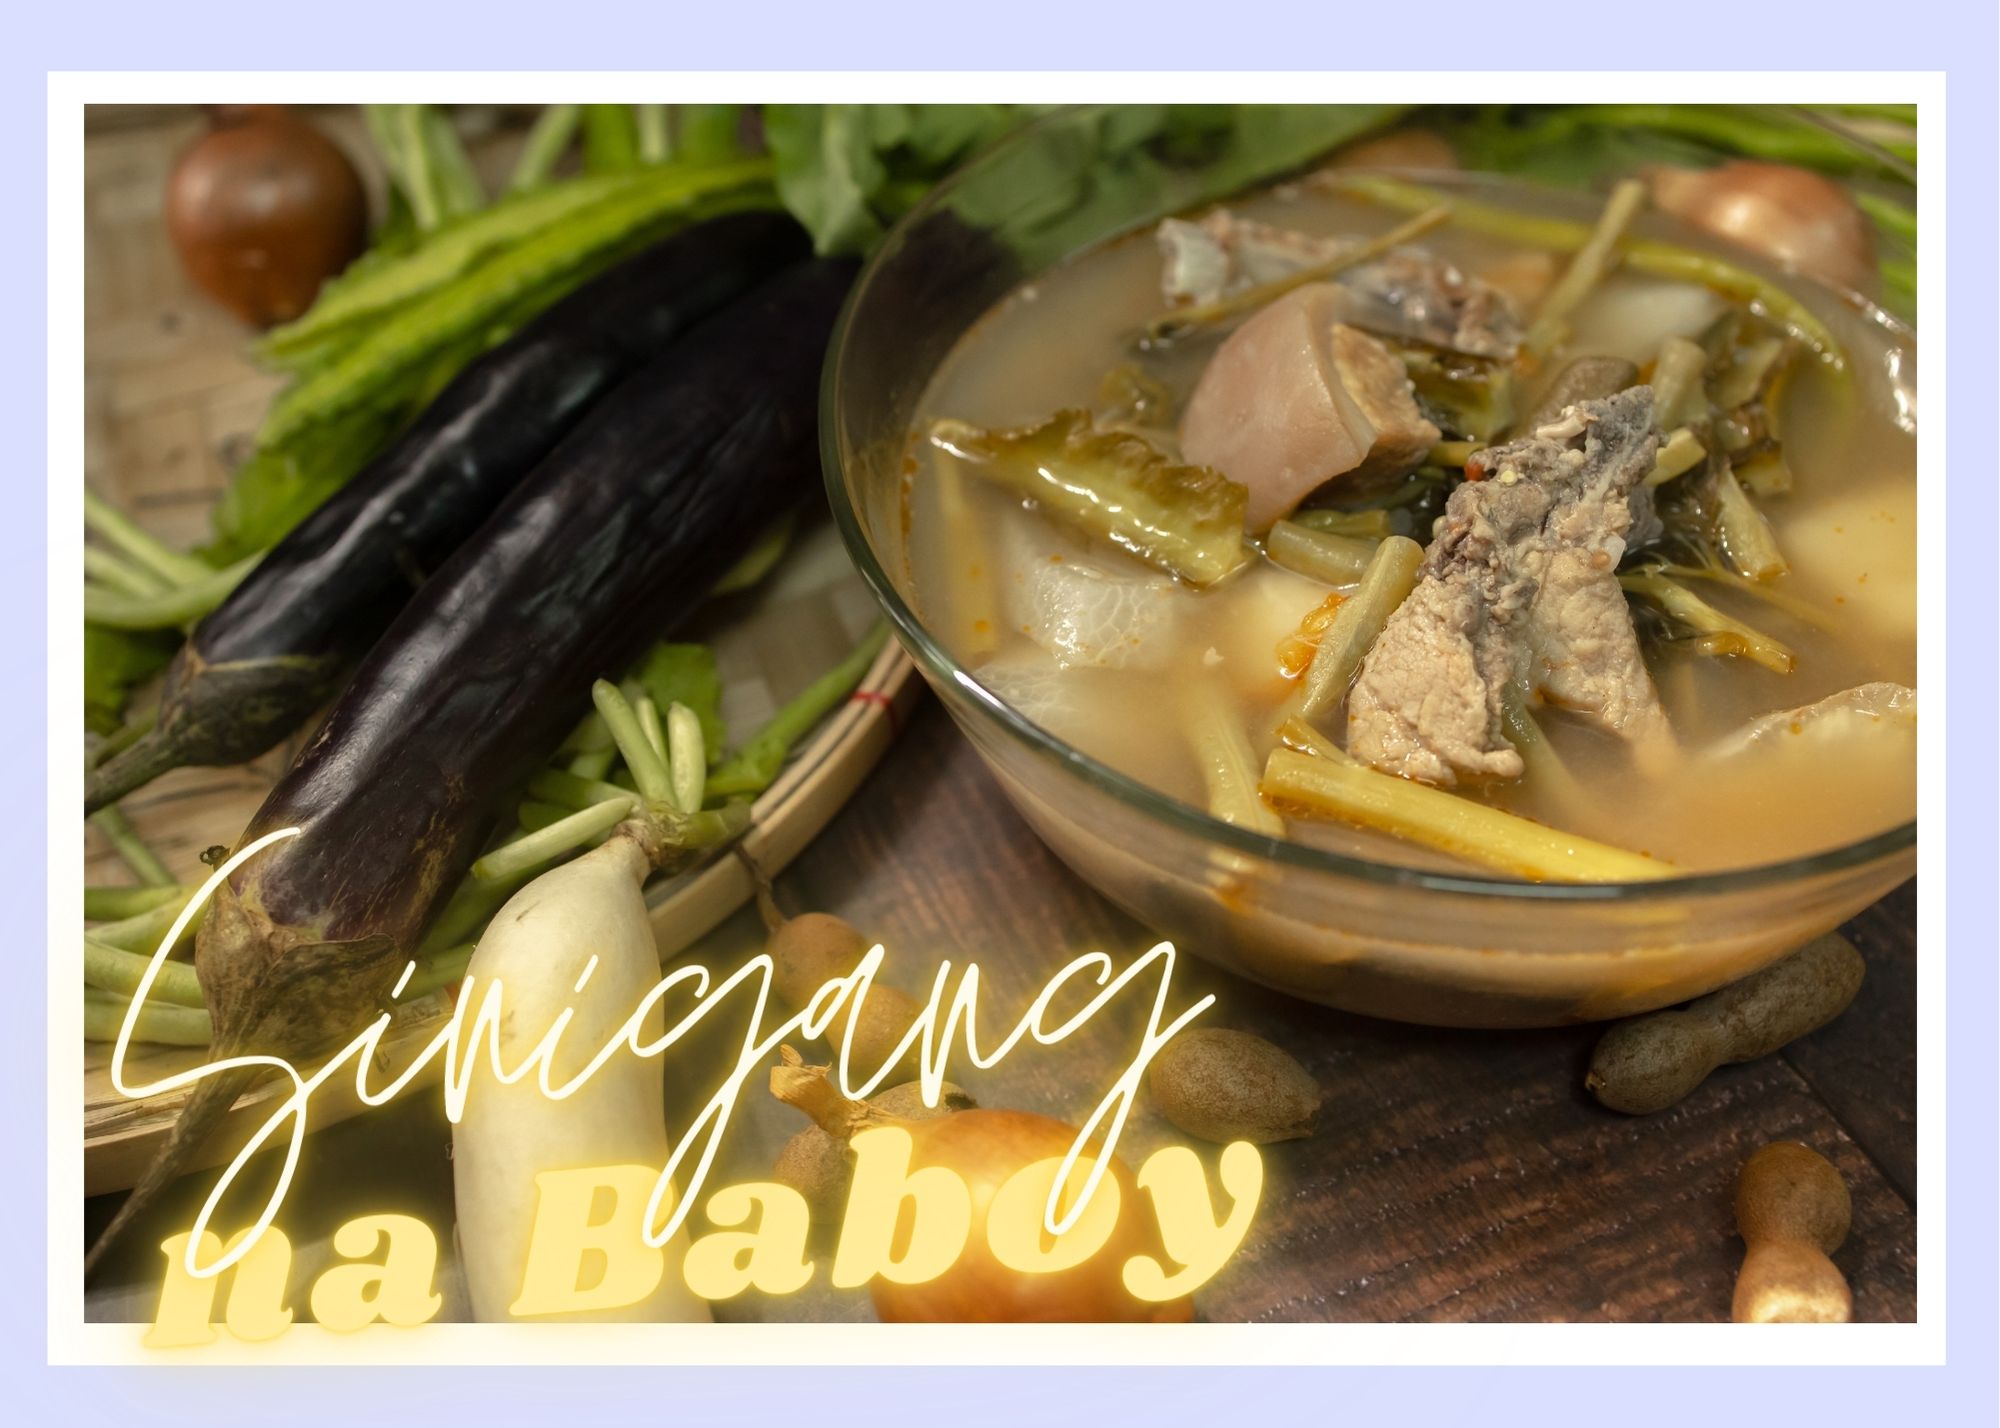 Here is a picture of Sinigang na Baboy!